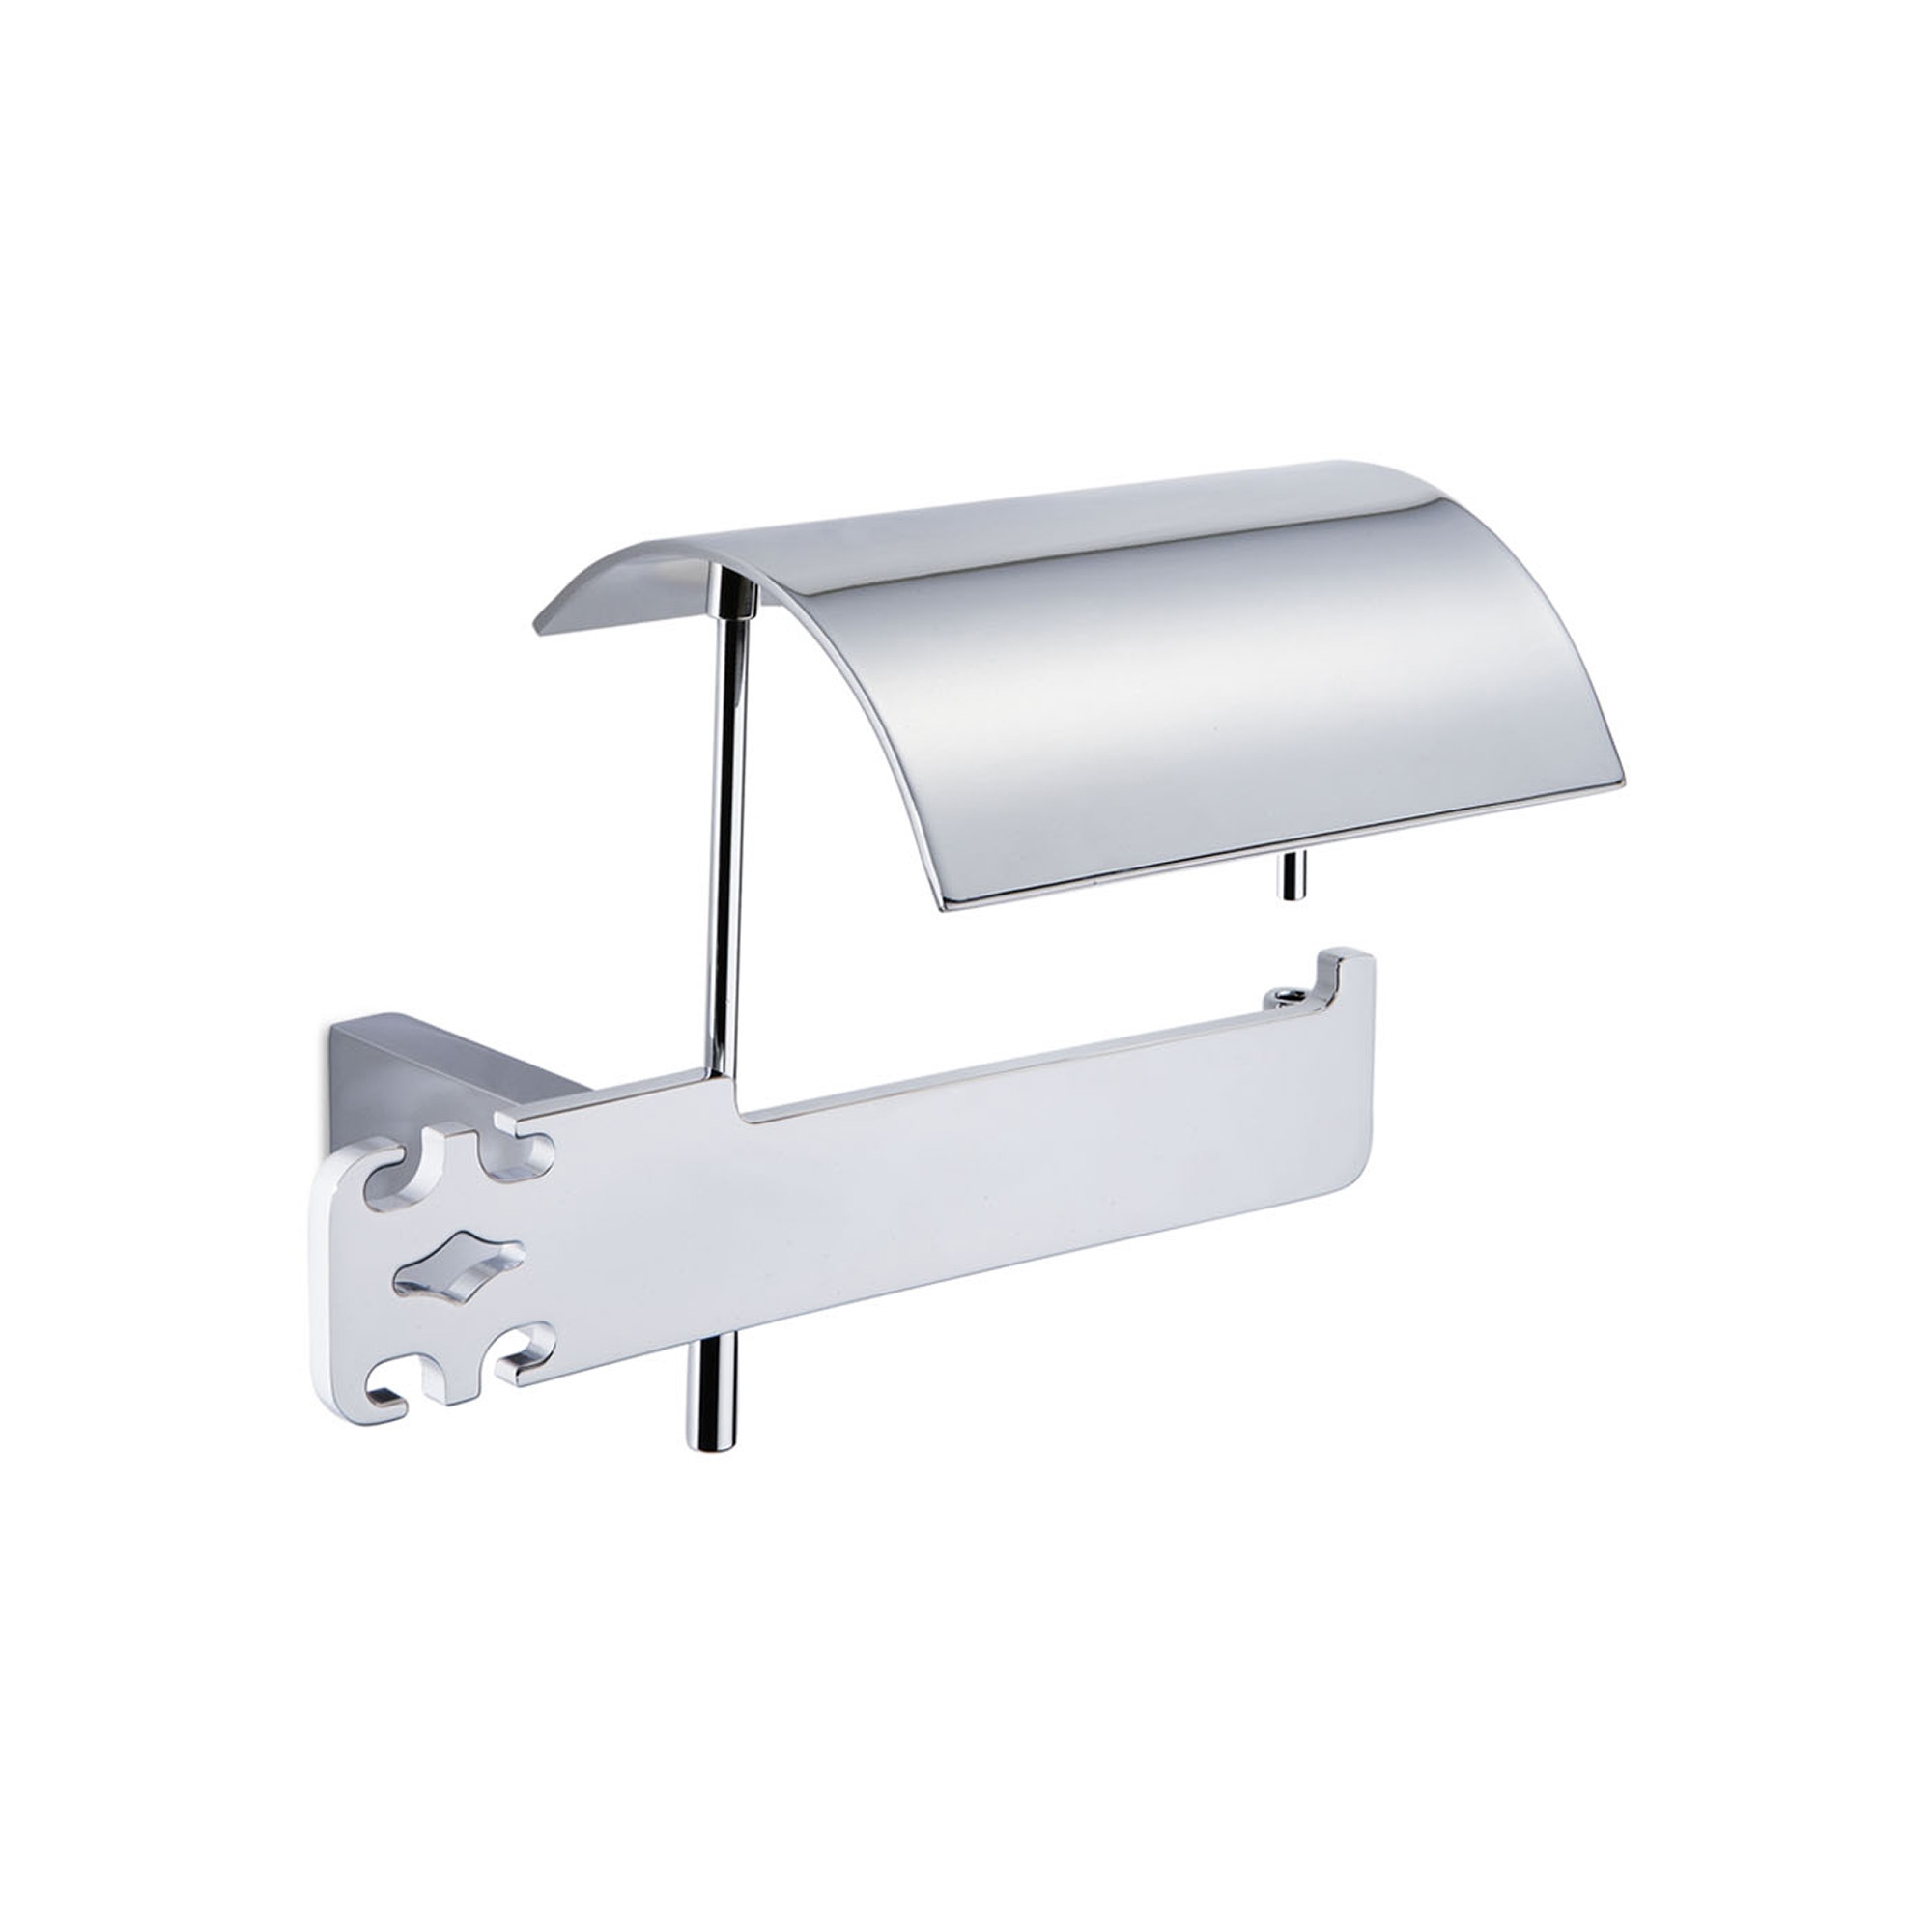 Damasc DM 3211C Toilet Paper Holder with Cover in Polished Chrome